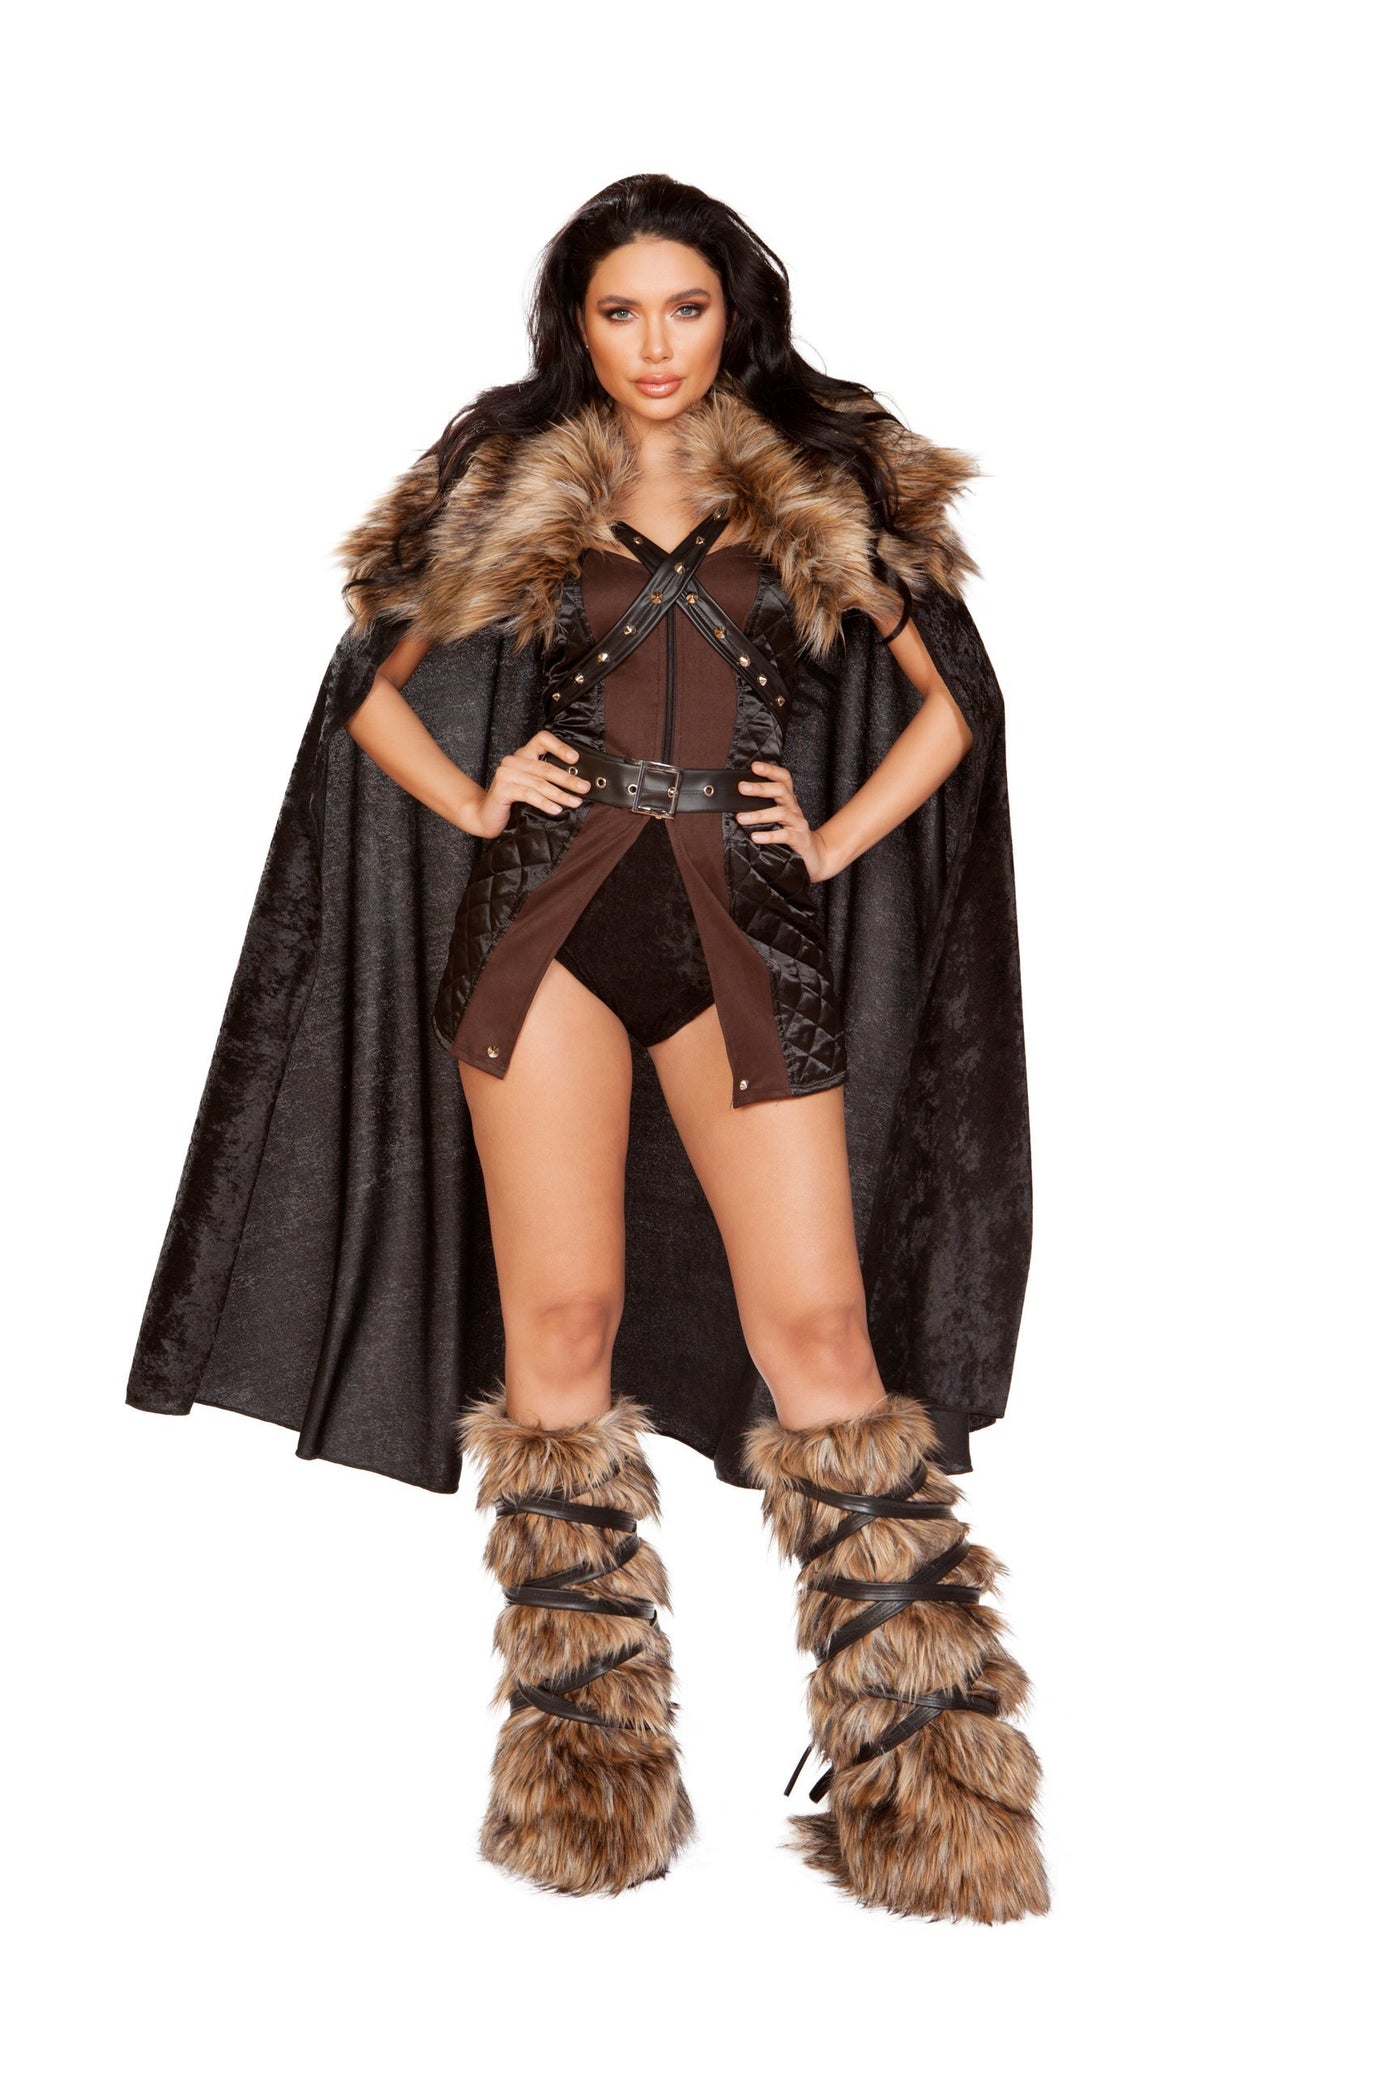 Buy 4pc Northern Warrior from RomaRetailShop for 137.99 with Same Day Shipping Designed by Roma Costume 4896-AS-S